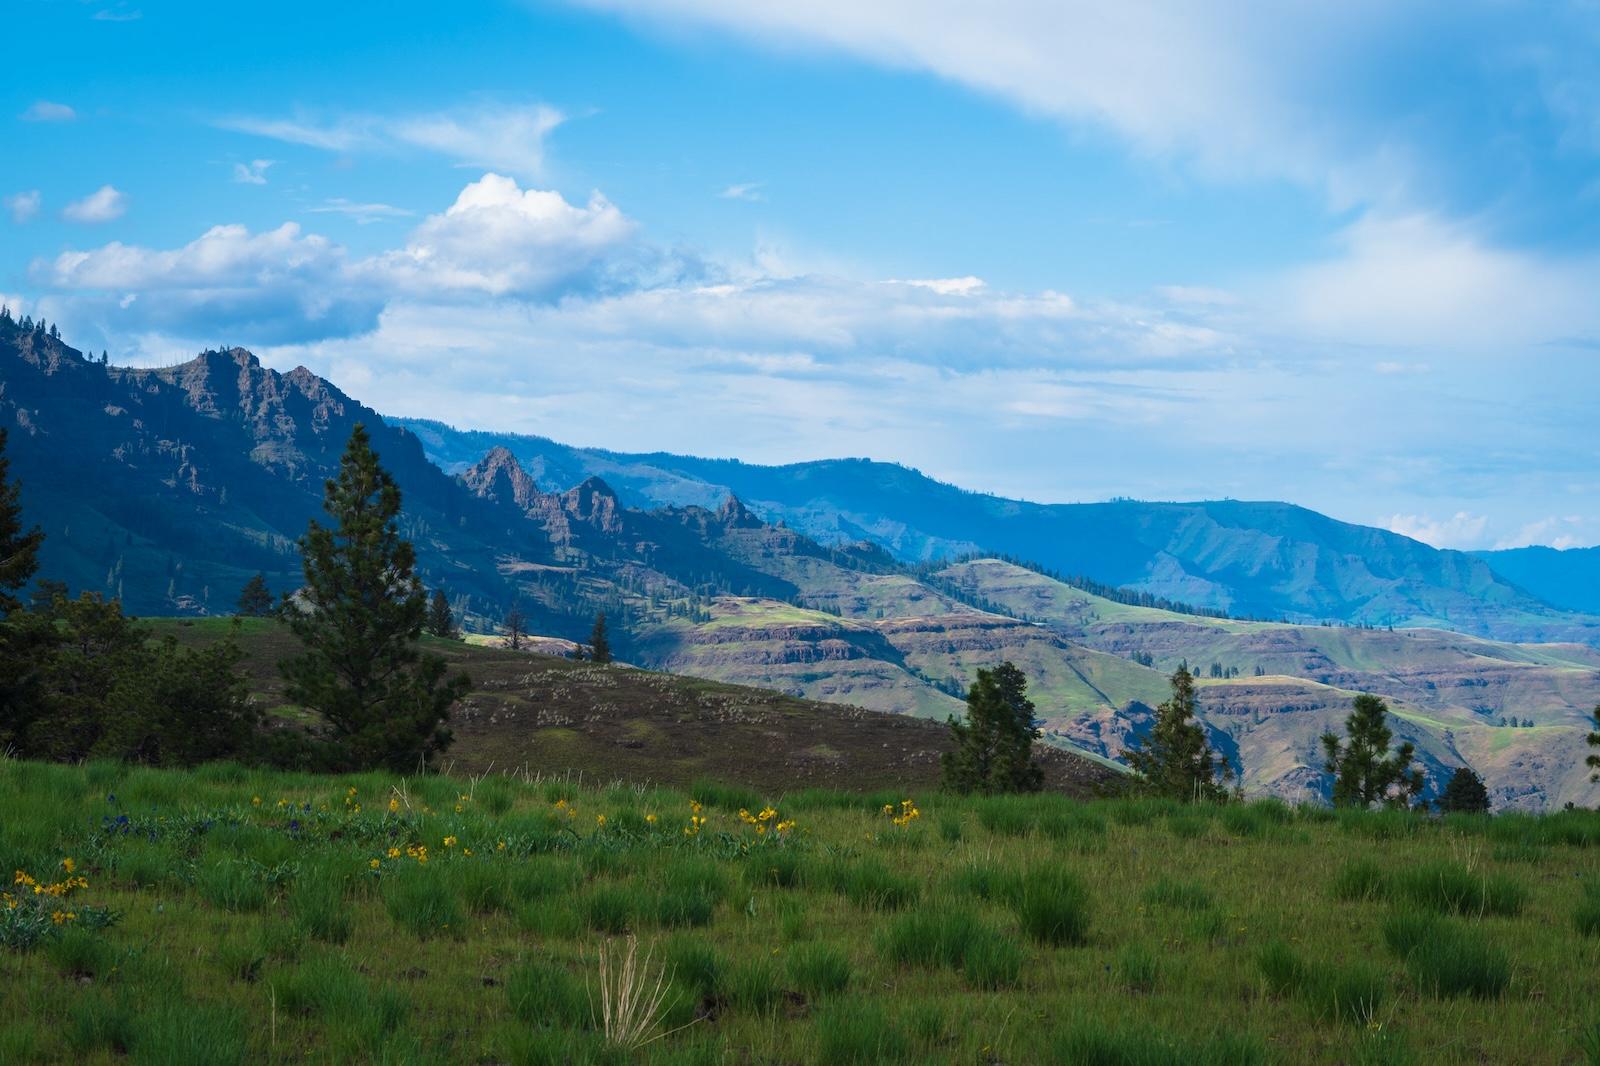 Distant rocky mountains in Hells Canyon